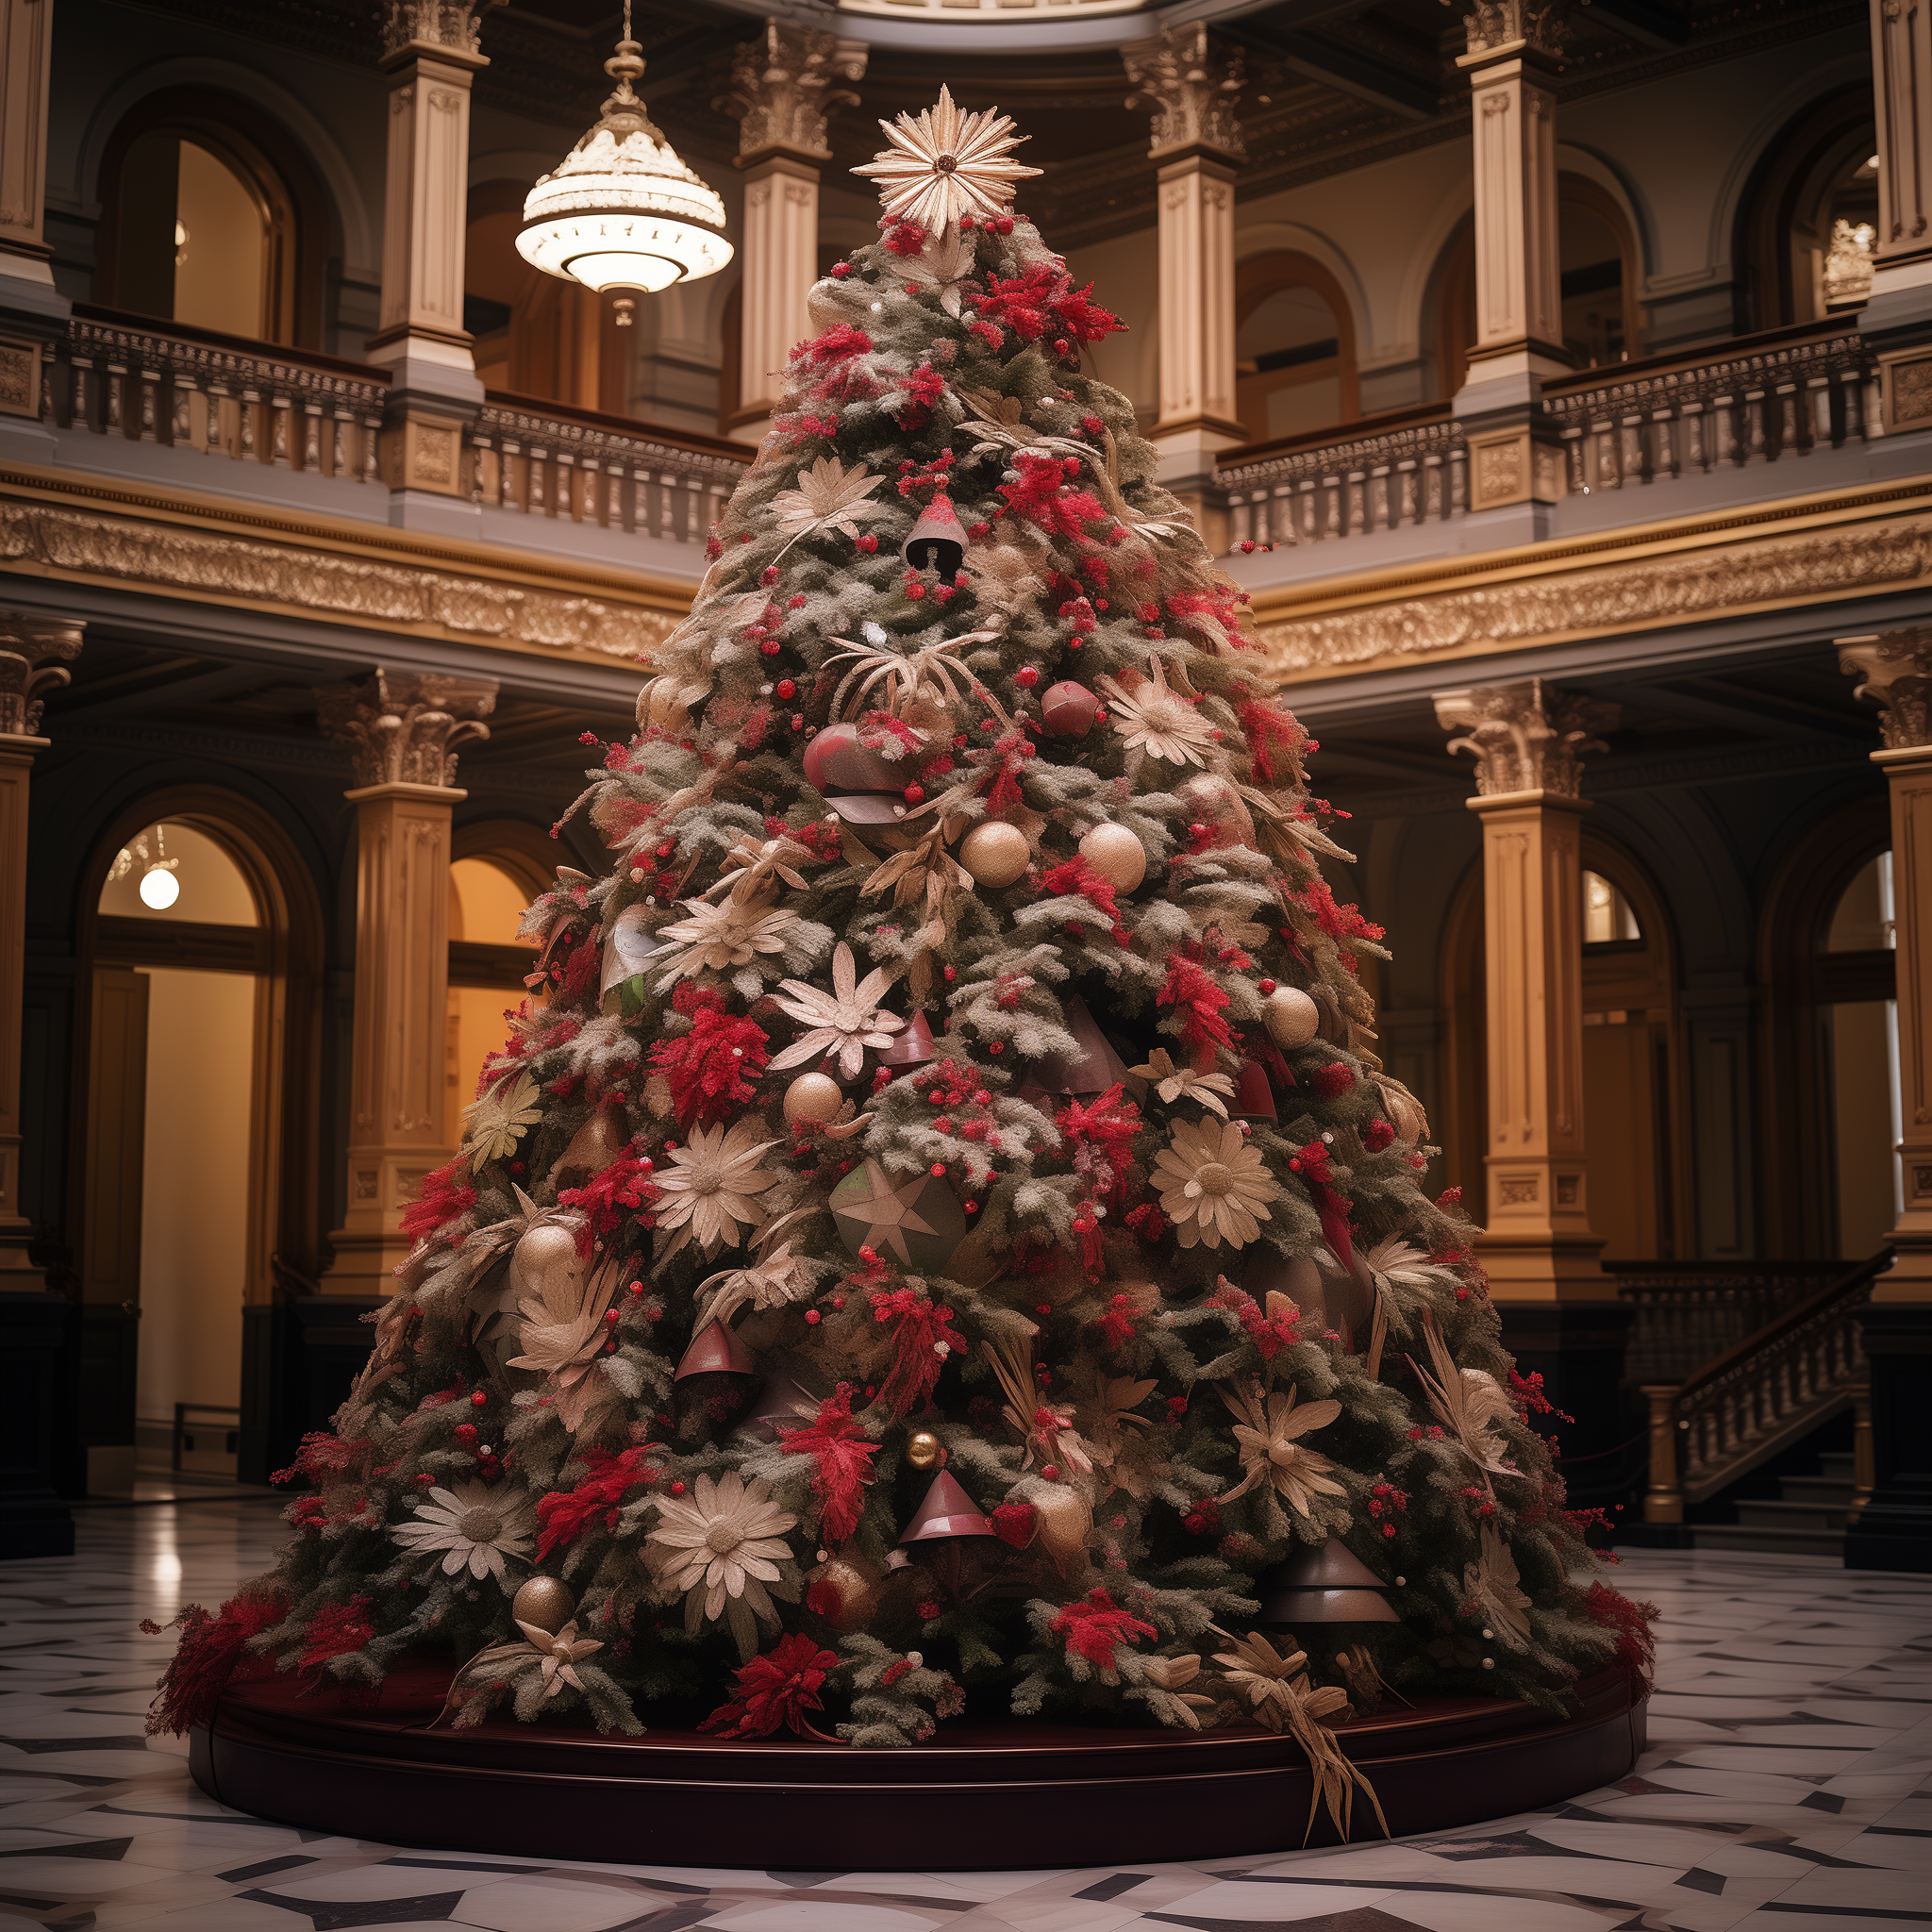 A tall, grand Christmas tree in the middle of a fancy building that&#x27;s covered in floral decorations and bell ornaments with a star on top